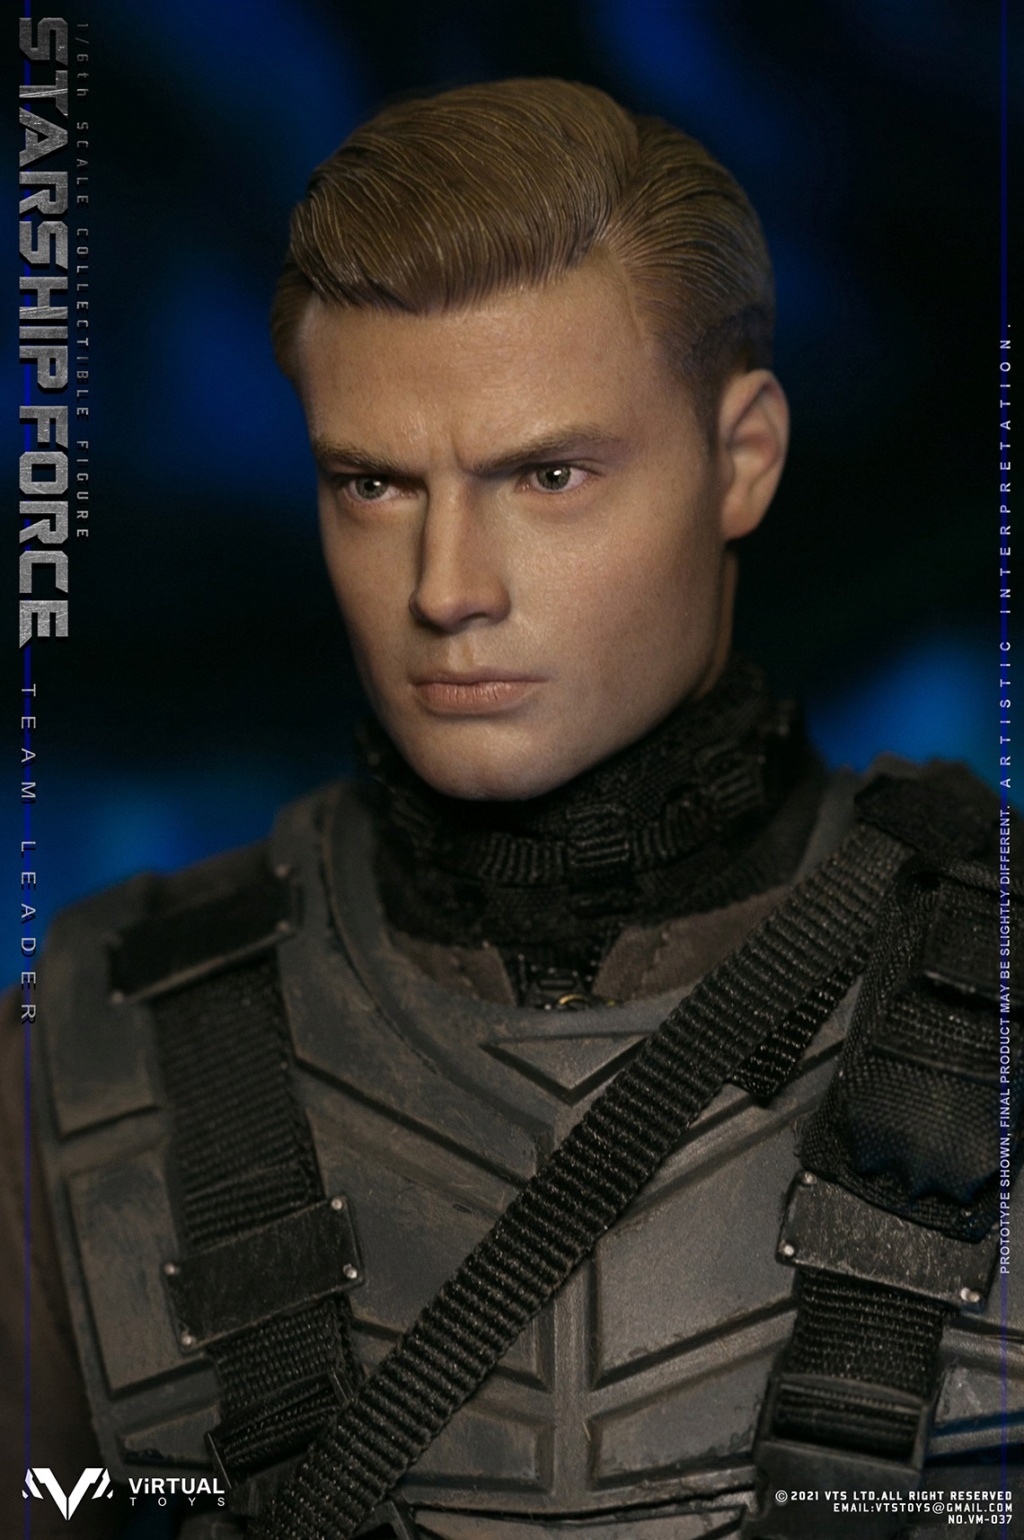 VTS - NEW PRODUCT: VTS VM037DX 1/6 Scale Starship Force-Team Leader Regular & Deluxe Version 15250111